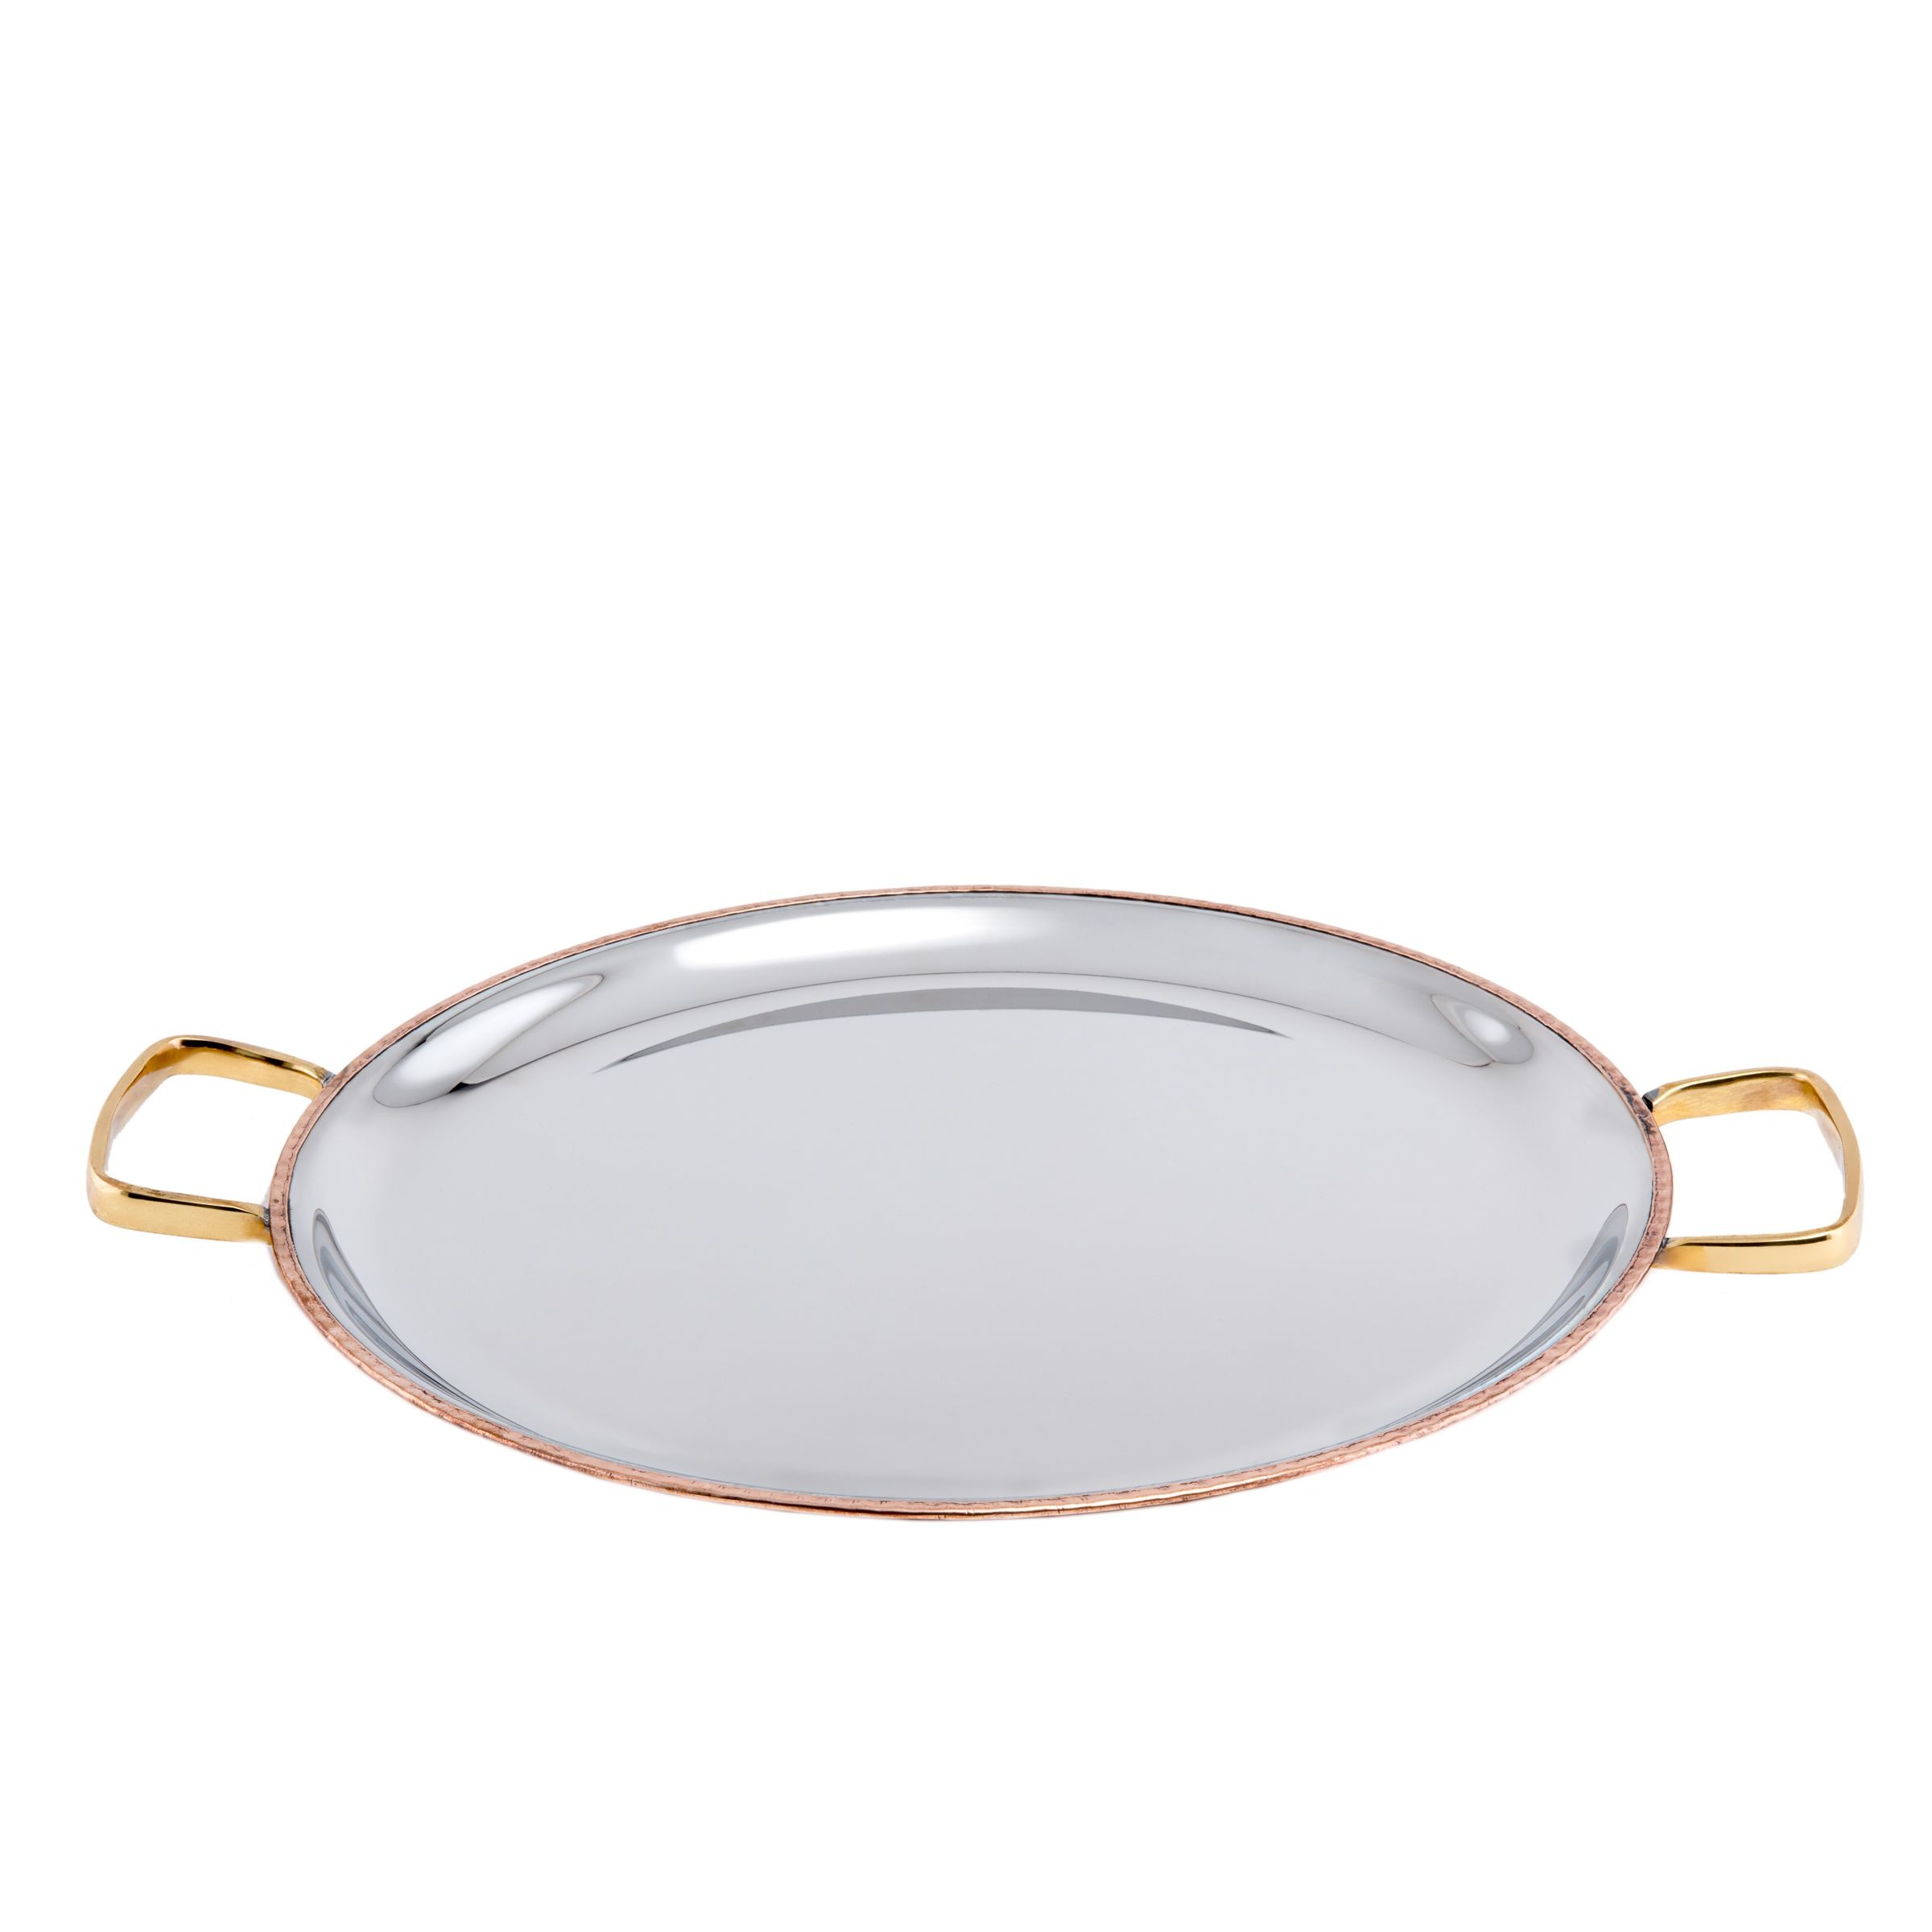 Old Dutch International 2P451H Two-Ply Solid Copper / Stainless Steel Tray with Brass Handles, 11" Dia.